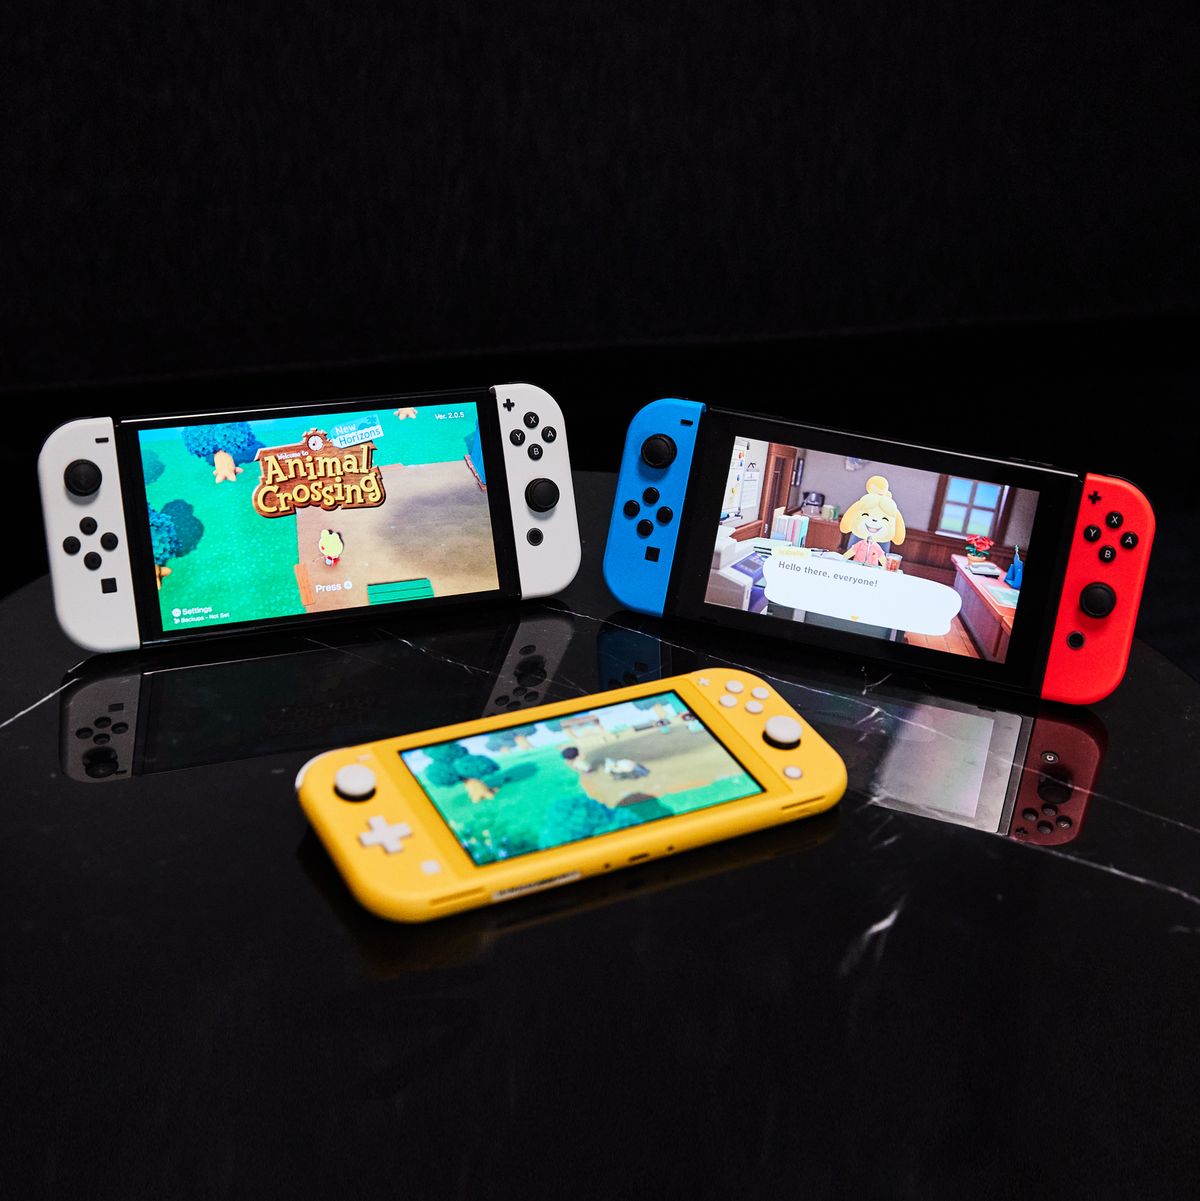 Nintendo Switch vs Switch OLED: which should you buy?